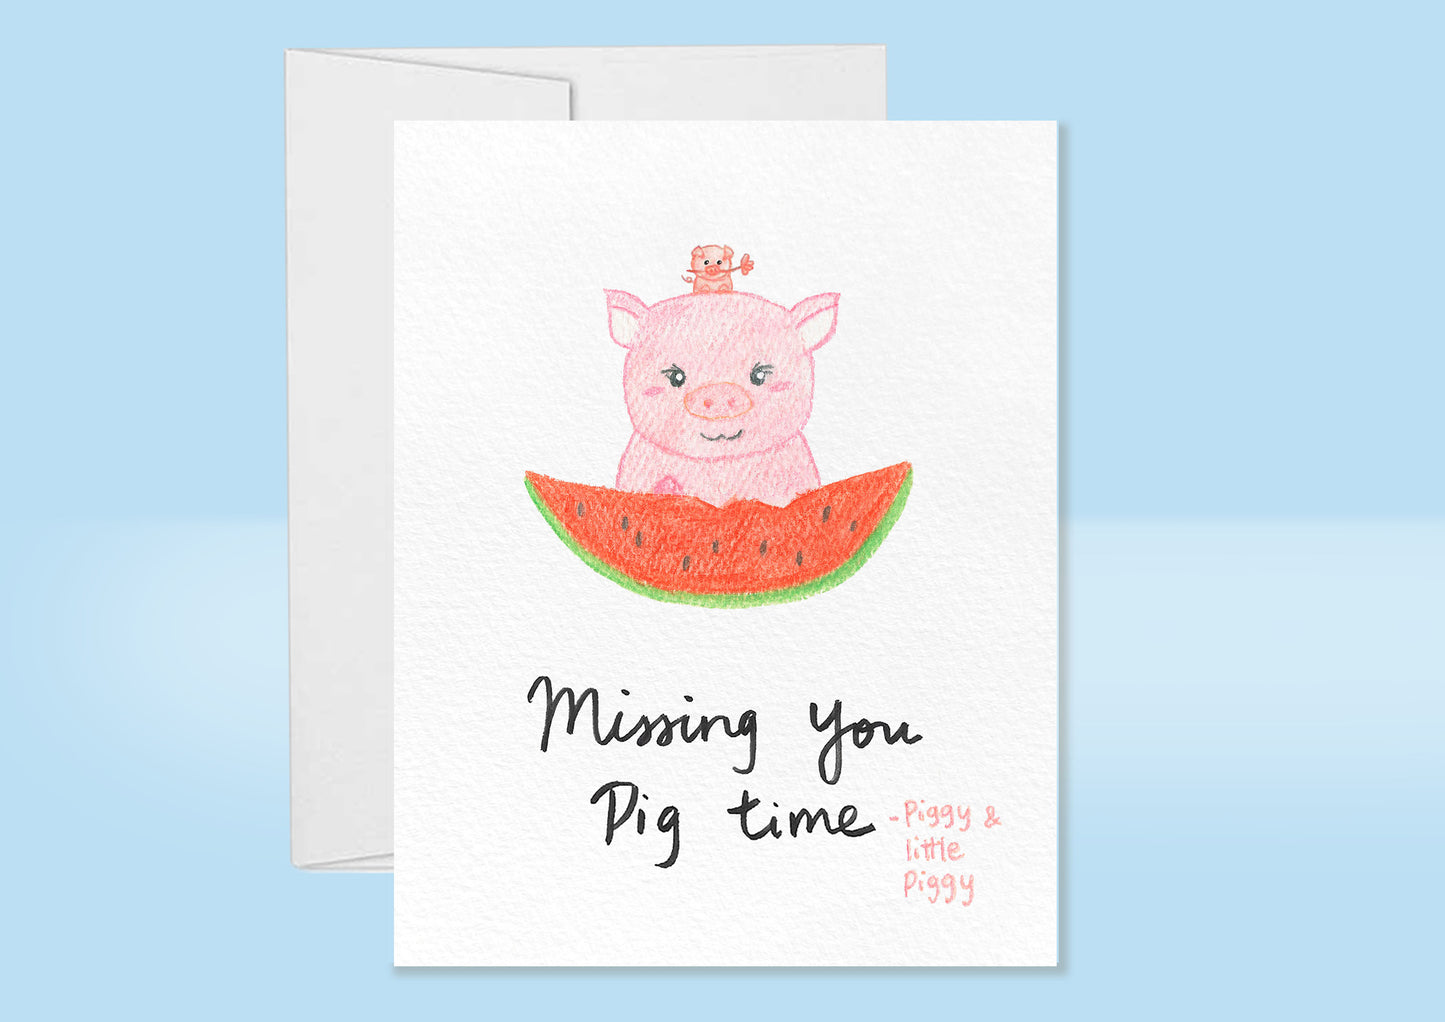 Love You Pig Time - Handpainted